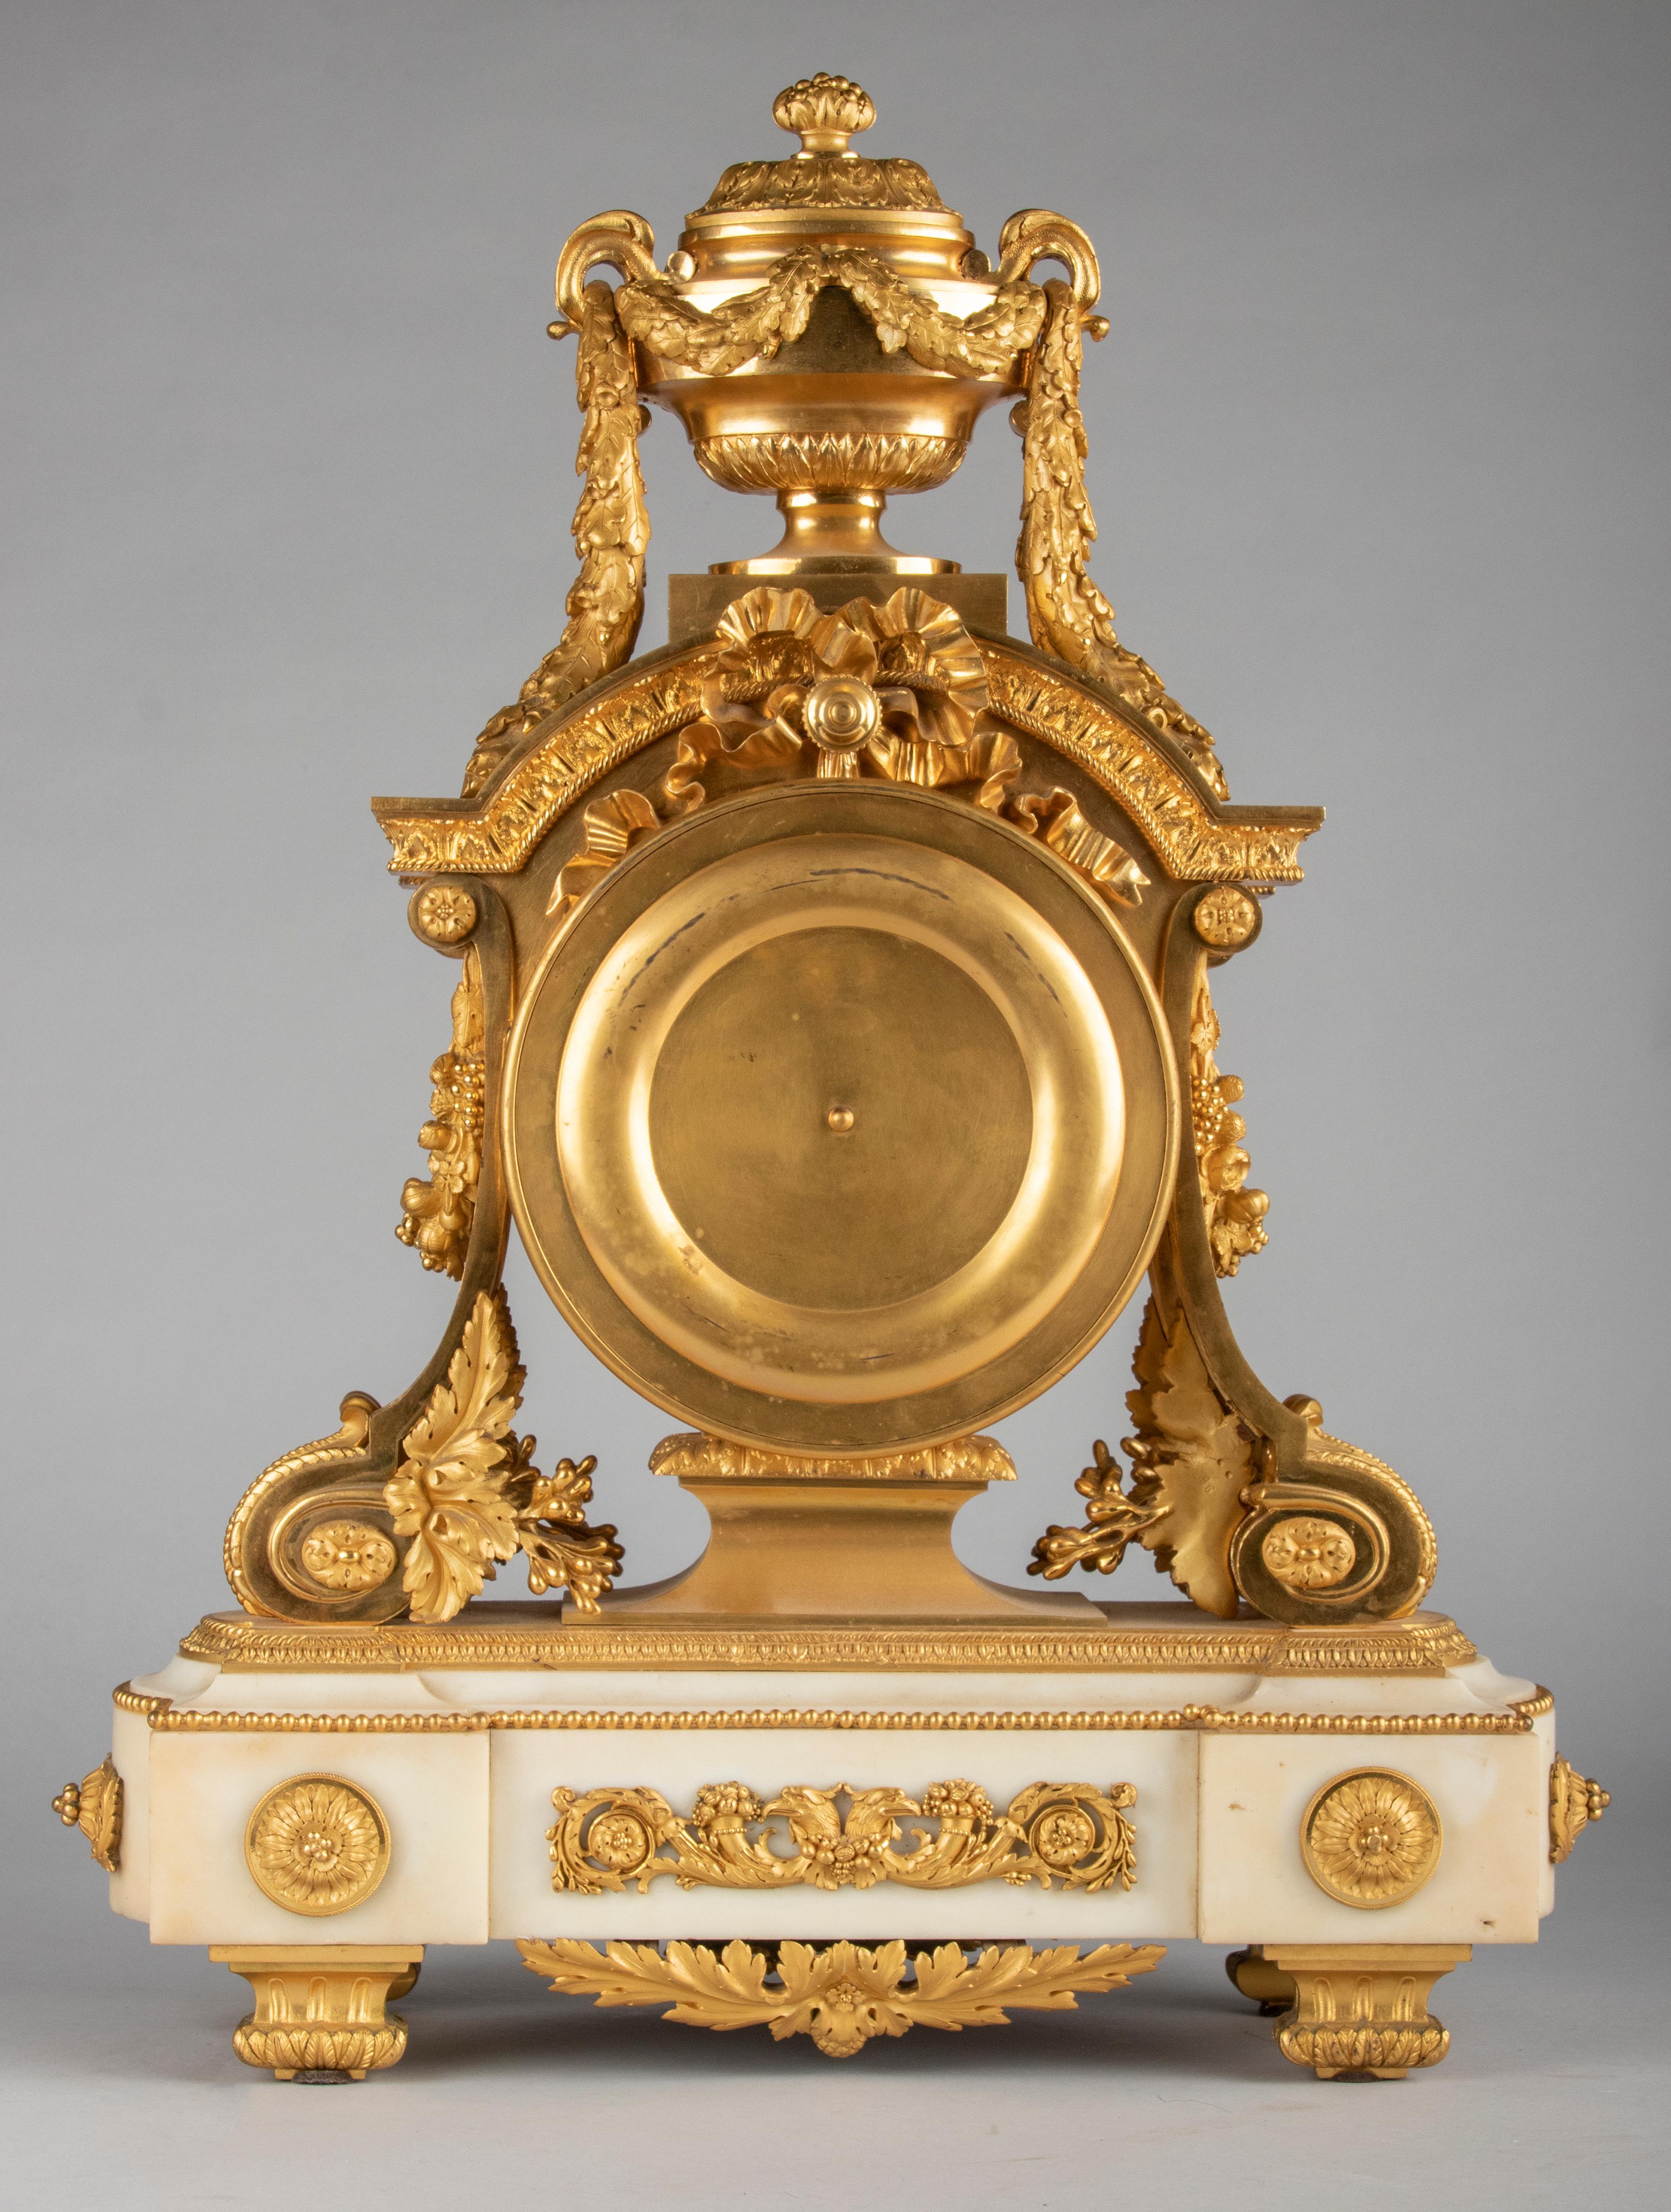 Late 19th Century Louis XVI Style Bronze Ormolu Mantel Clock by Charpentier For Sale 13